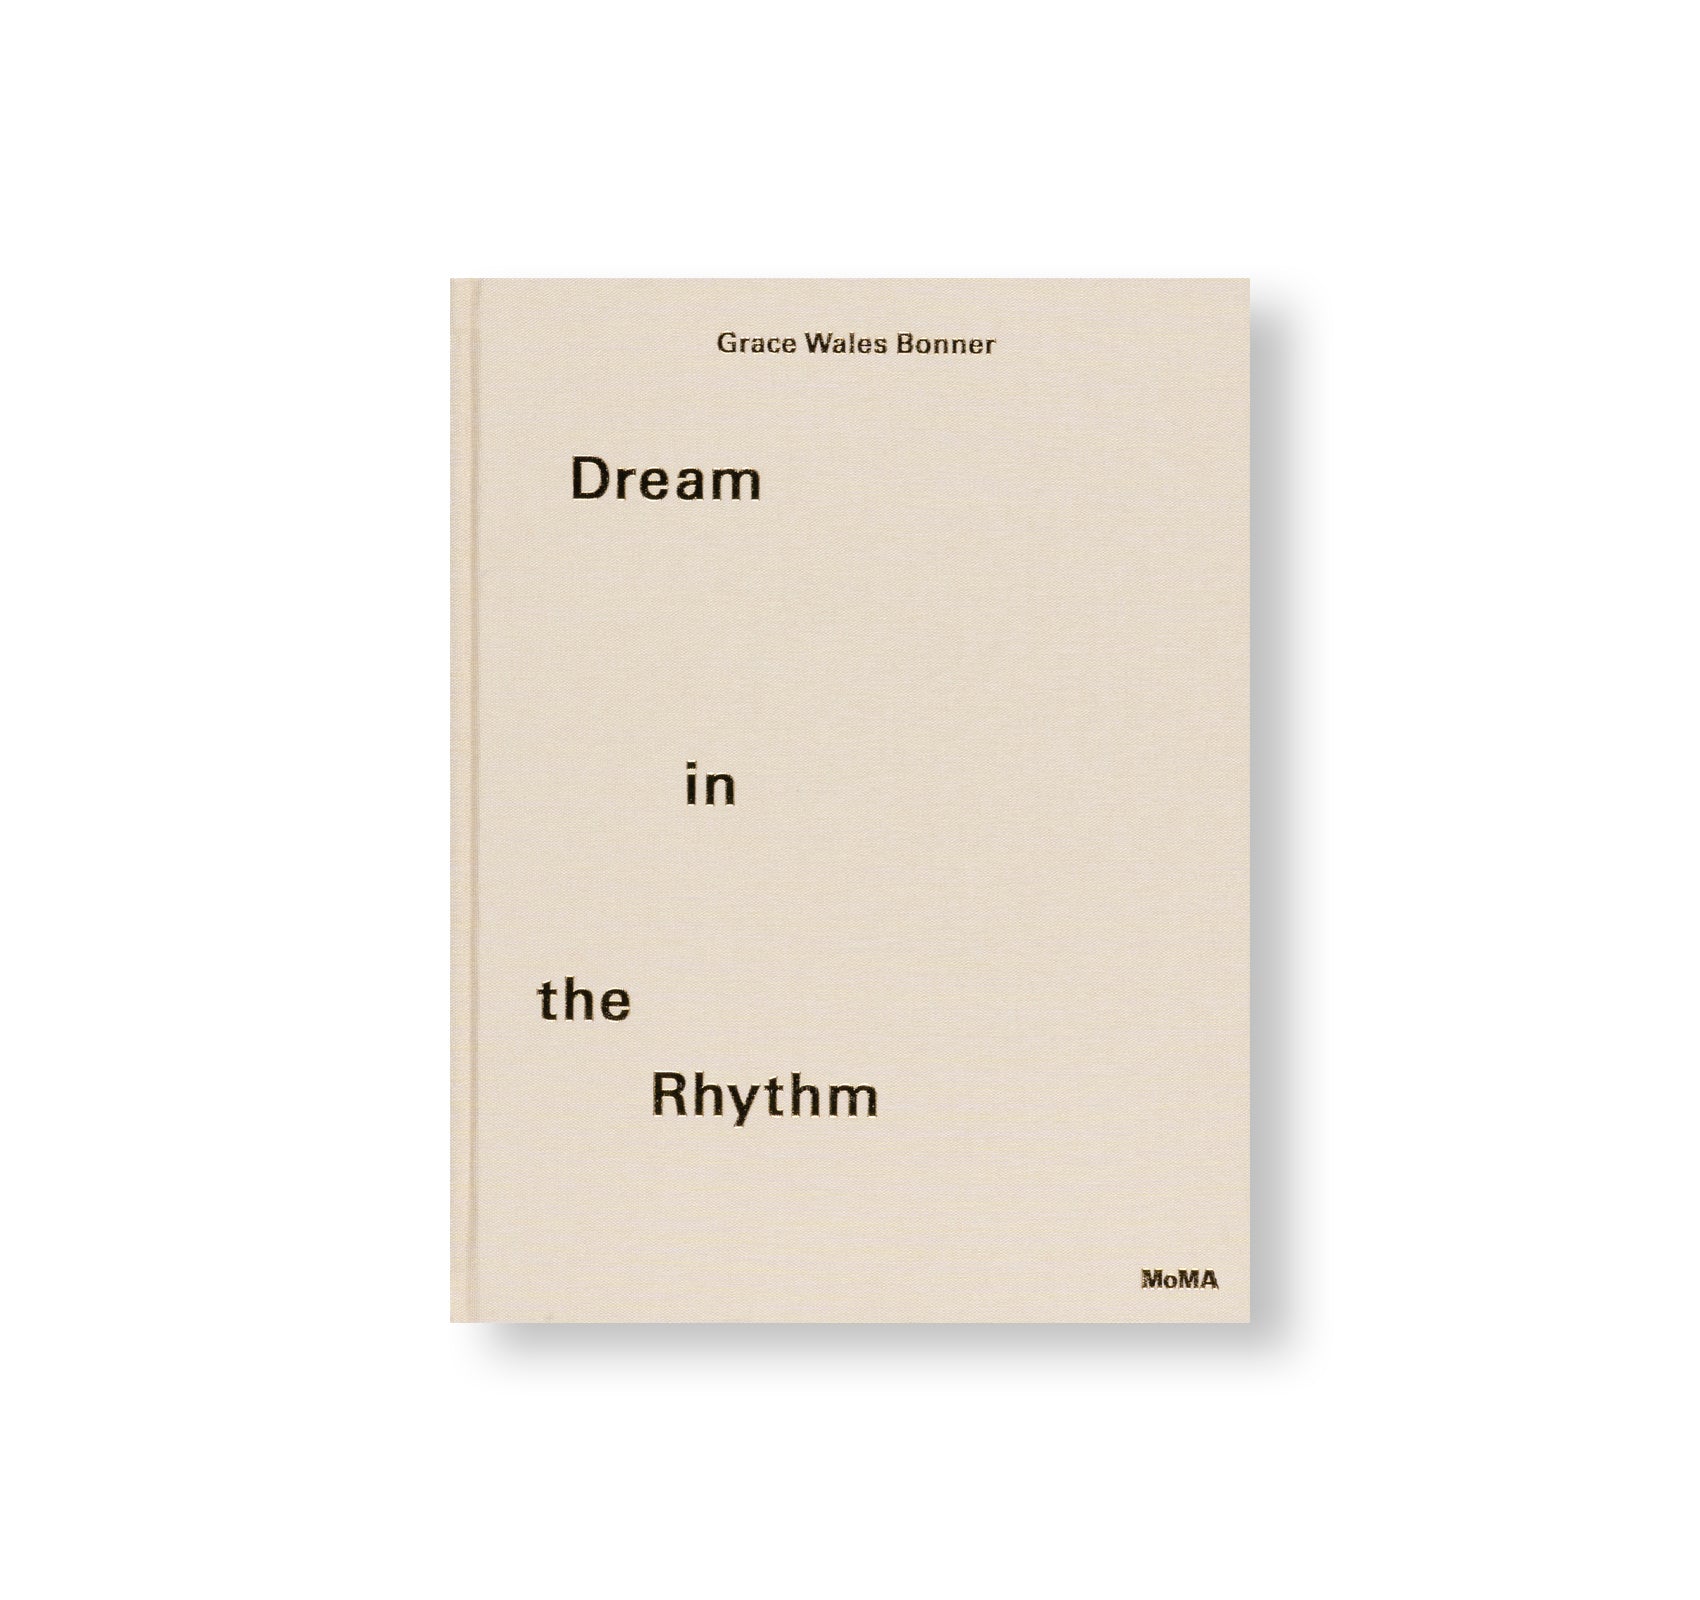 DREAM IN THE RHYTHM by Grace Wales Bonner